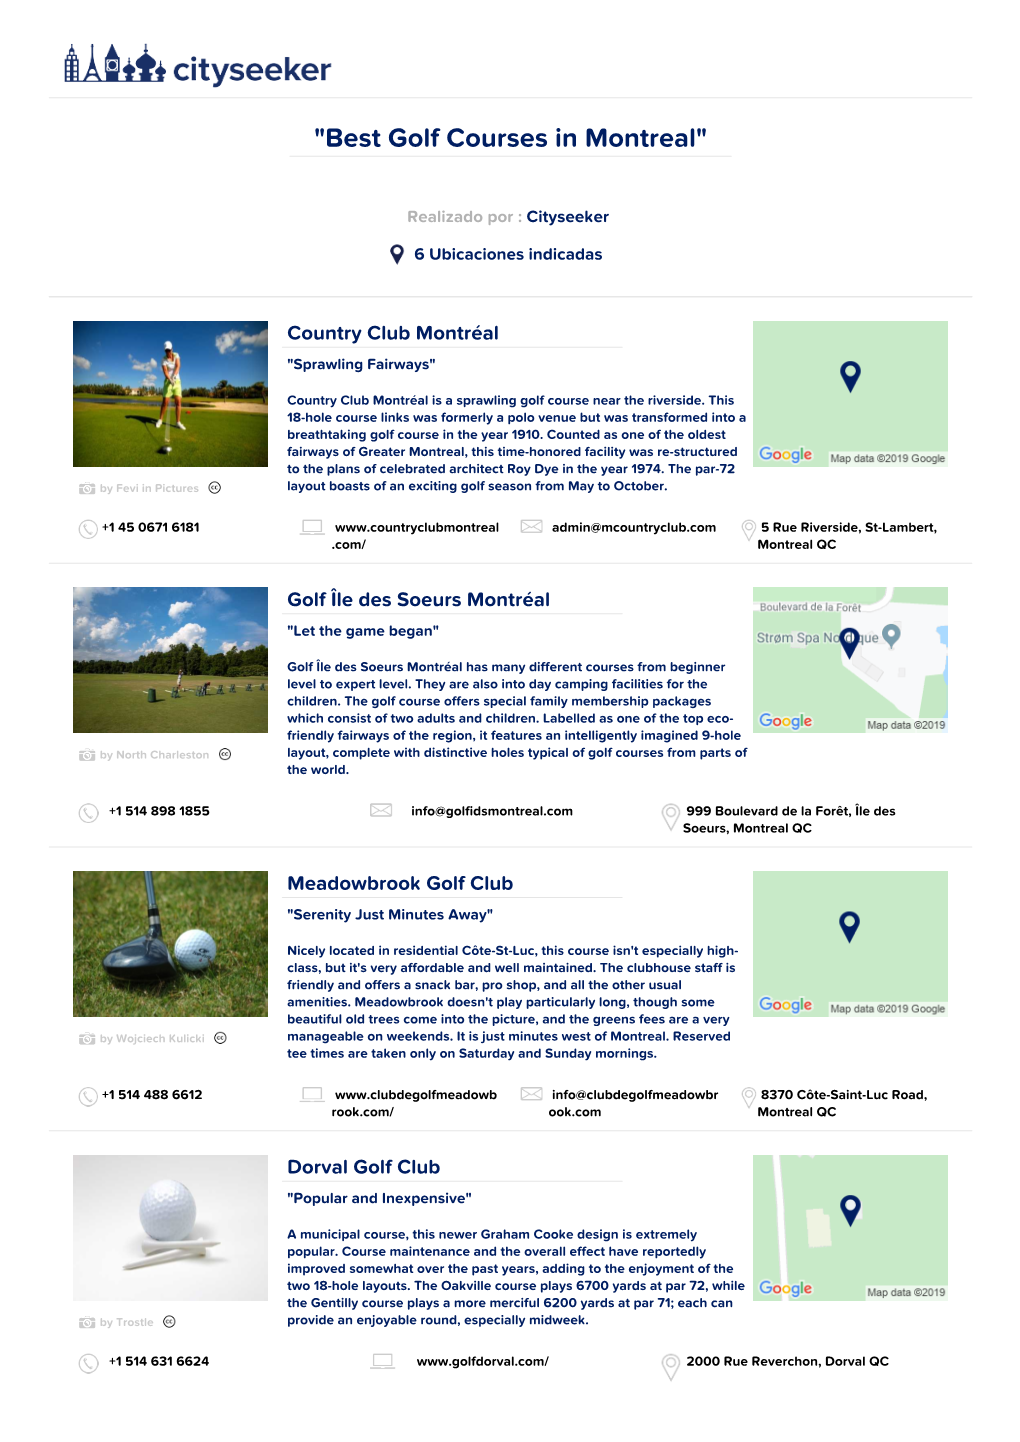 Best Golf Courses in Montreal"